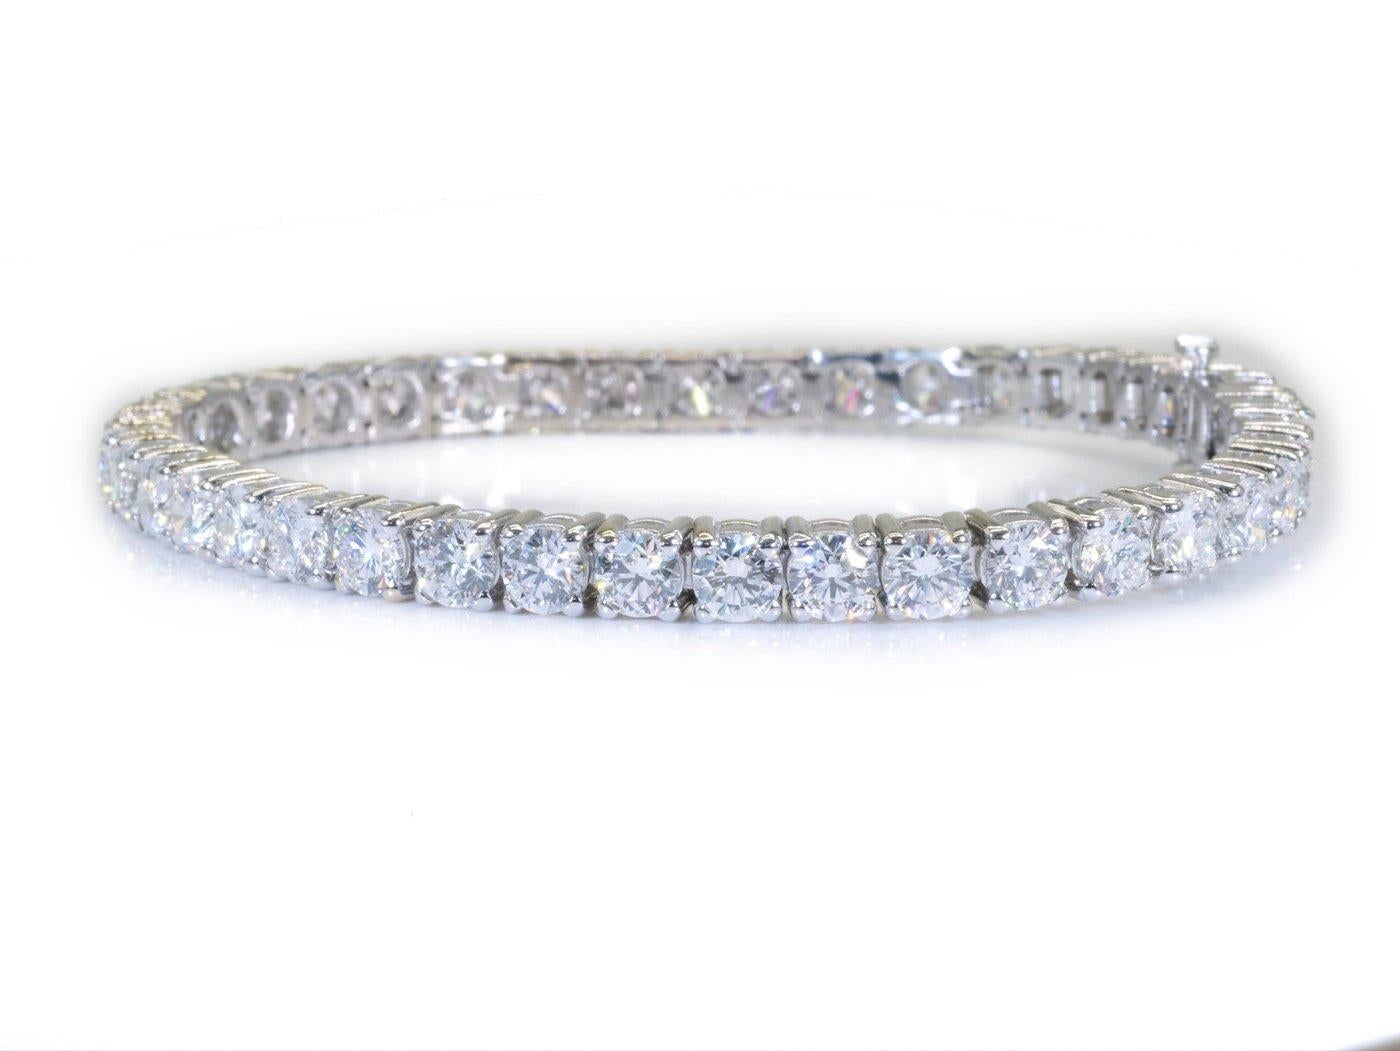 Luxurious 18k White Gold Bracelet w/ 12.51 Ct Natural Diamonds, GIA Certificate For Sale 3